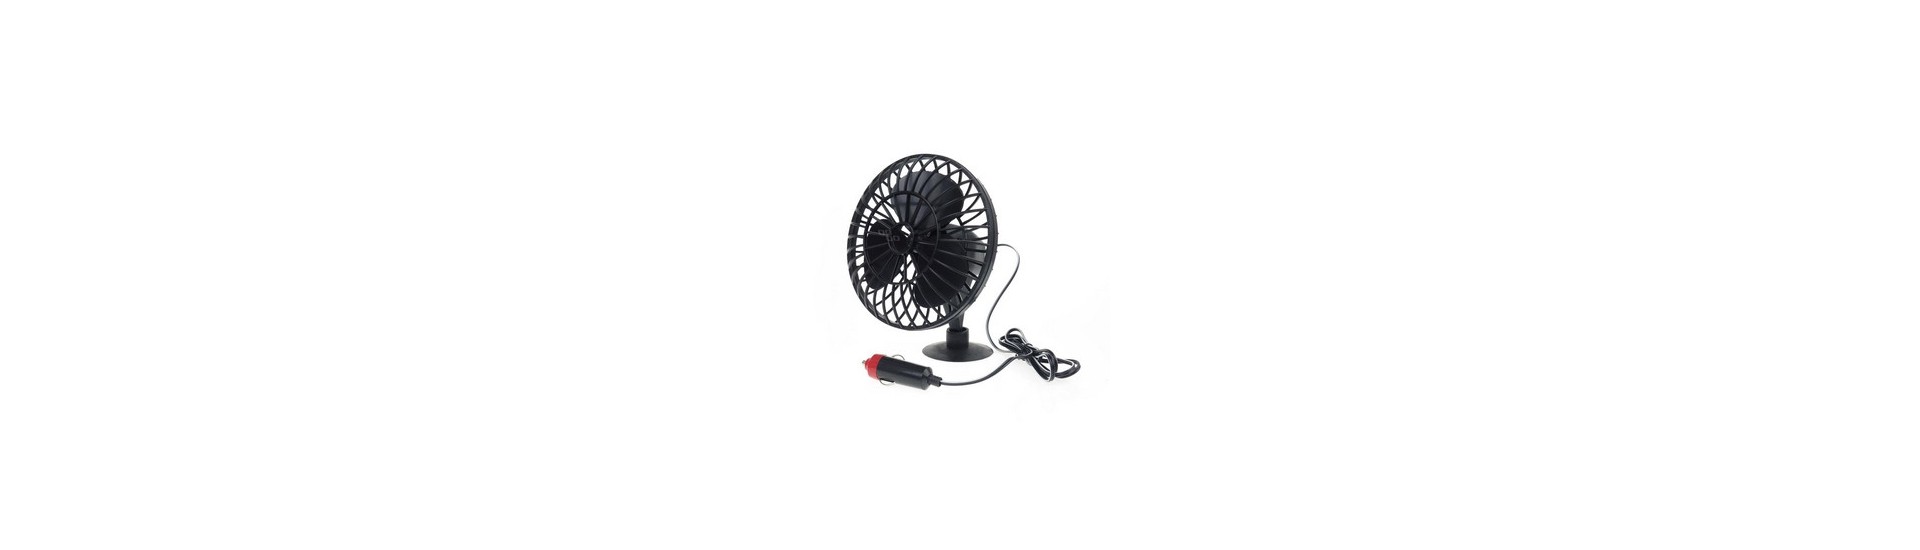 Ventilator at the best price car without a permit